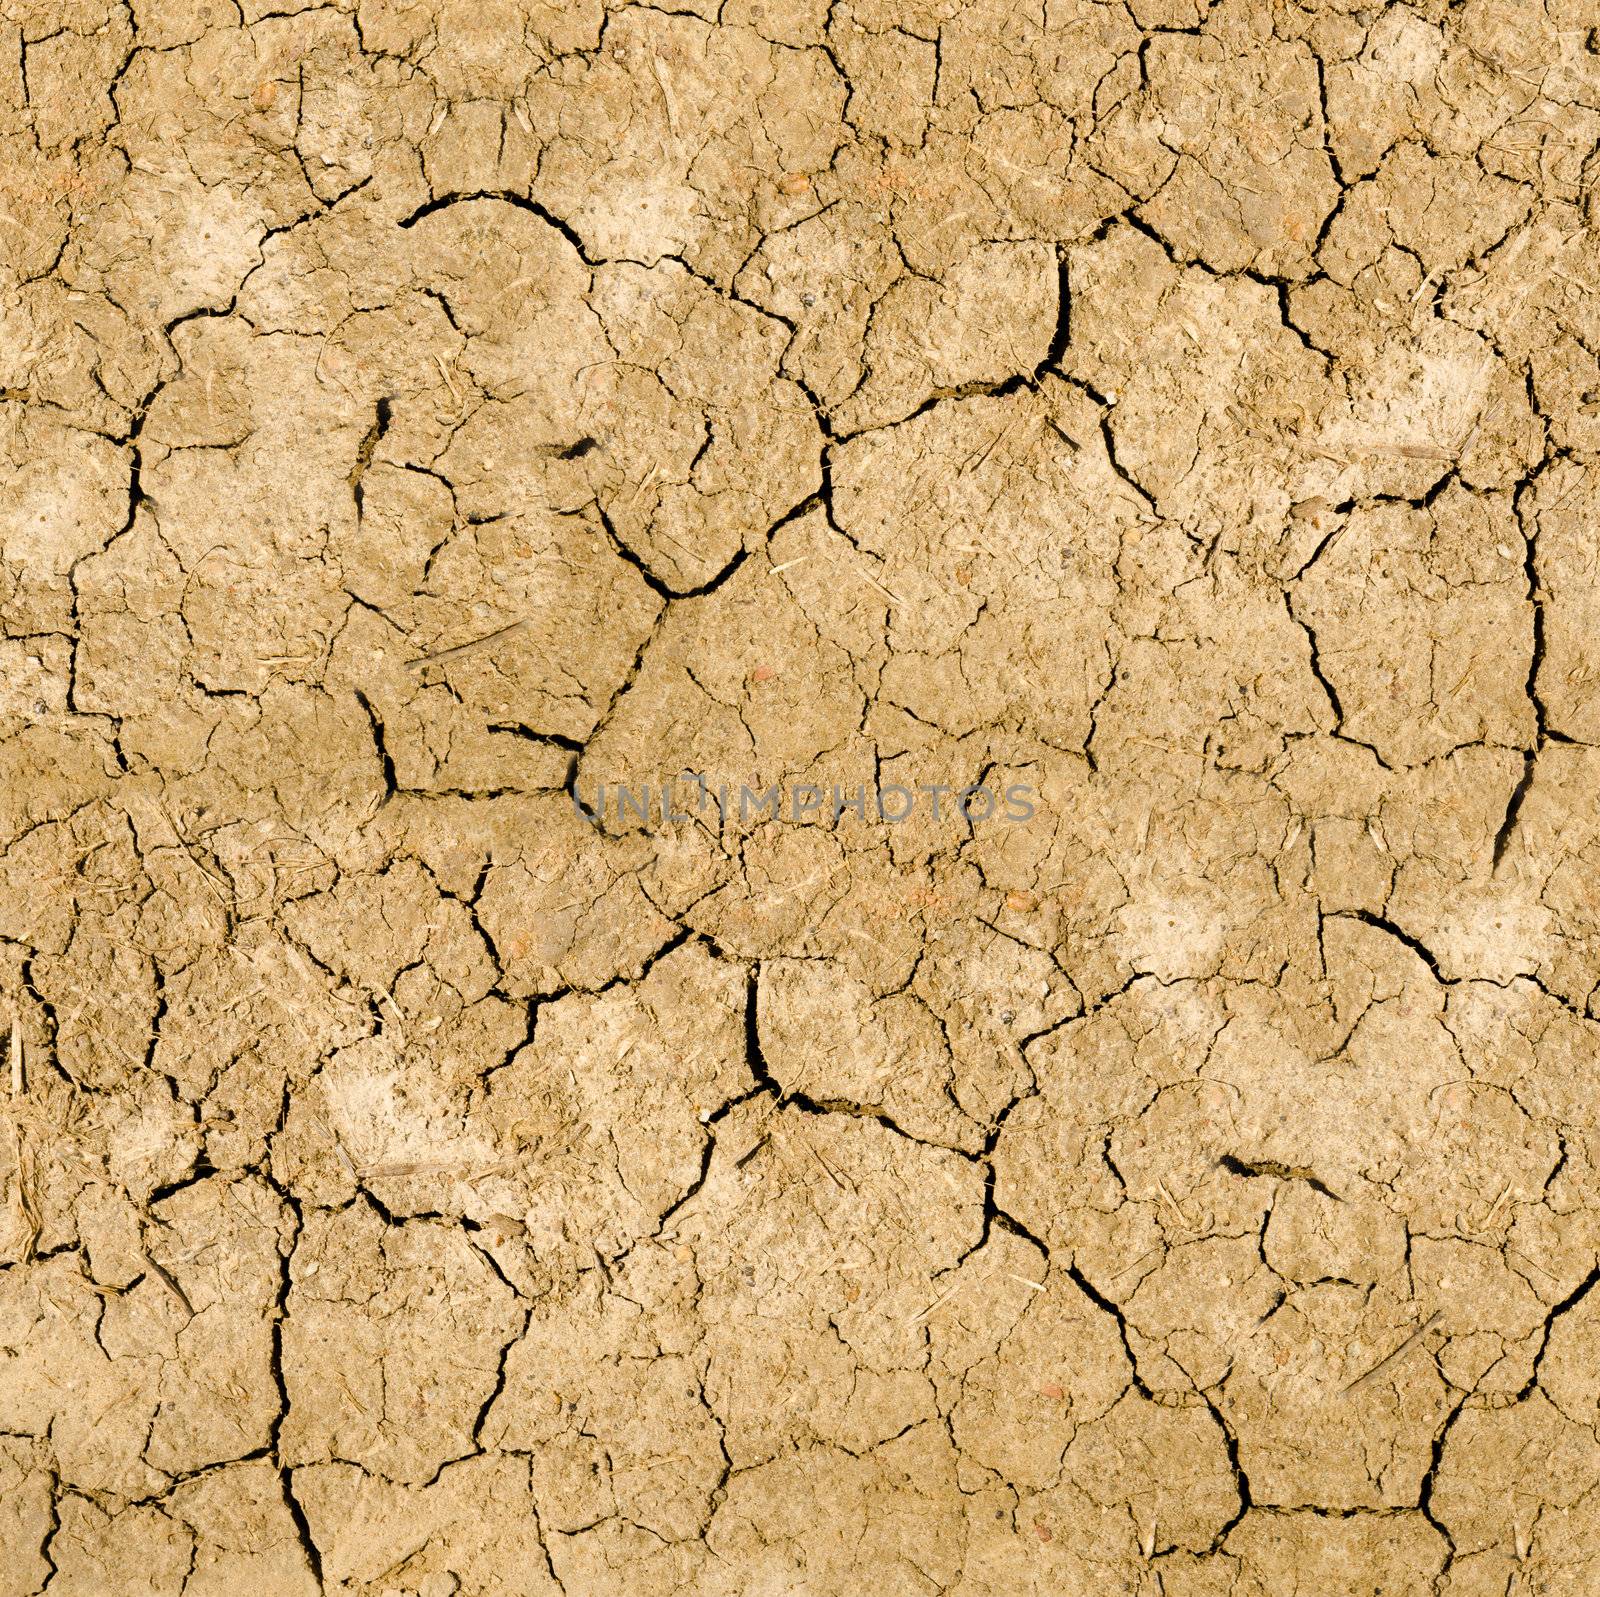 Clay soil with cracks without water. soil erosion